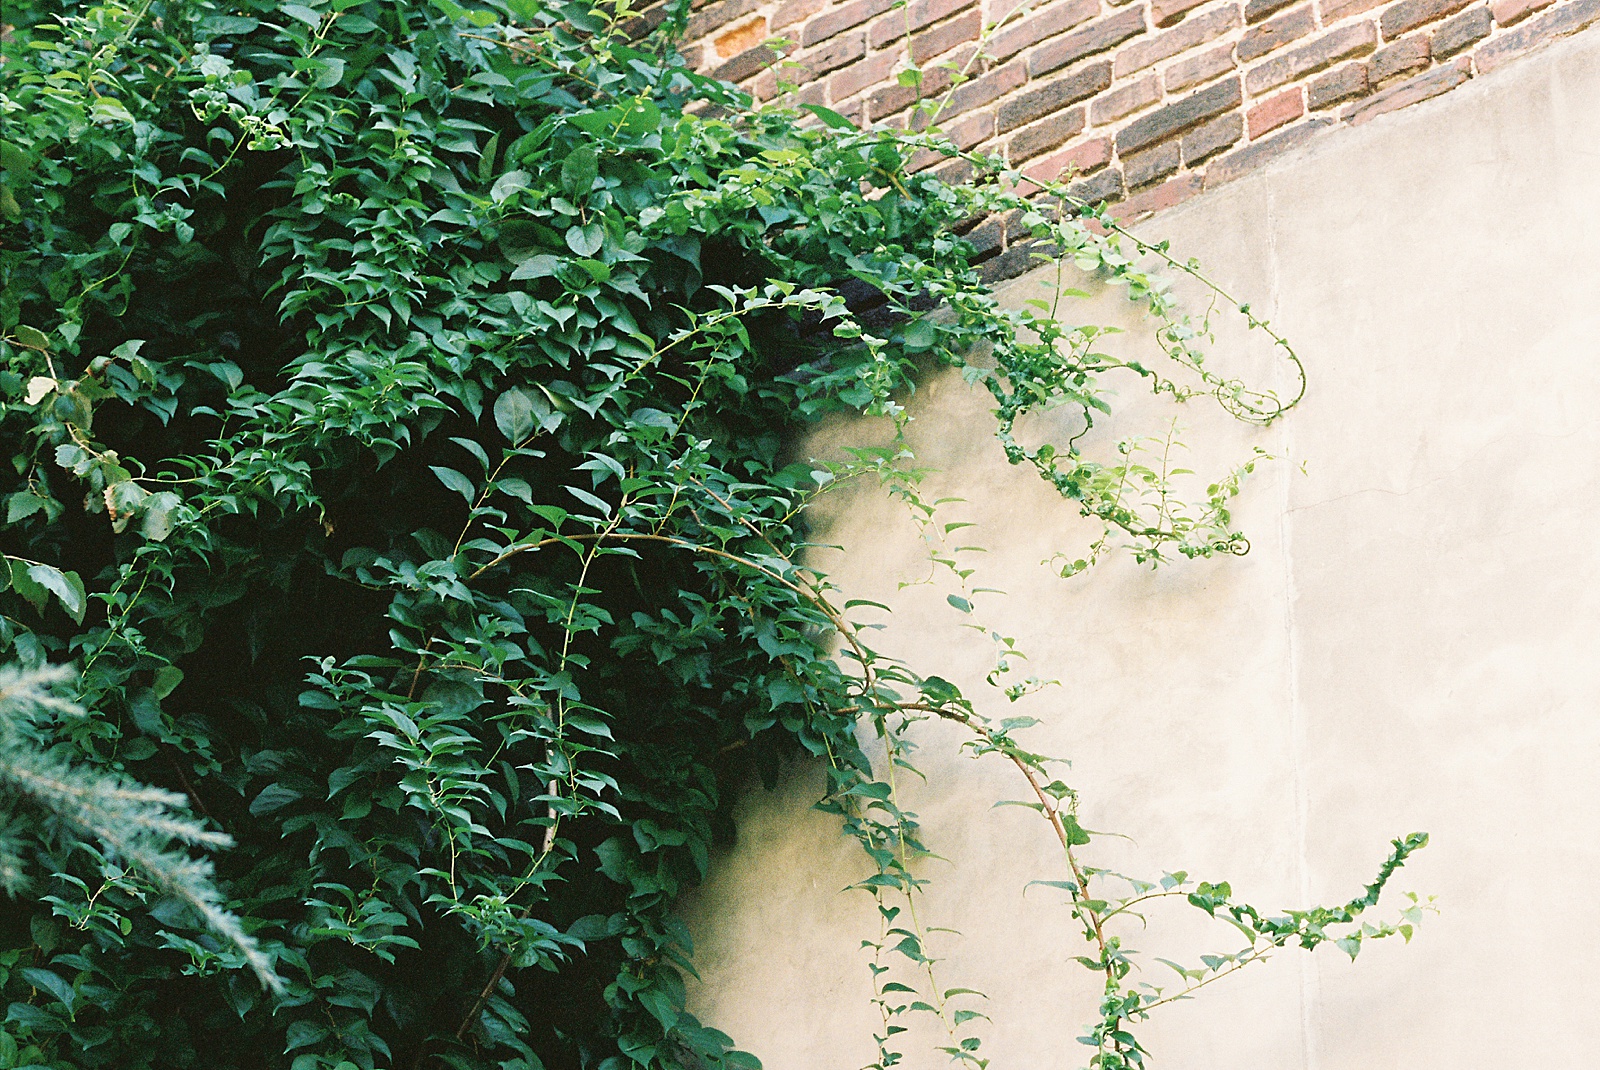 Vines grow up the side of the Maas Building garden wall.